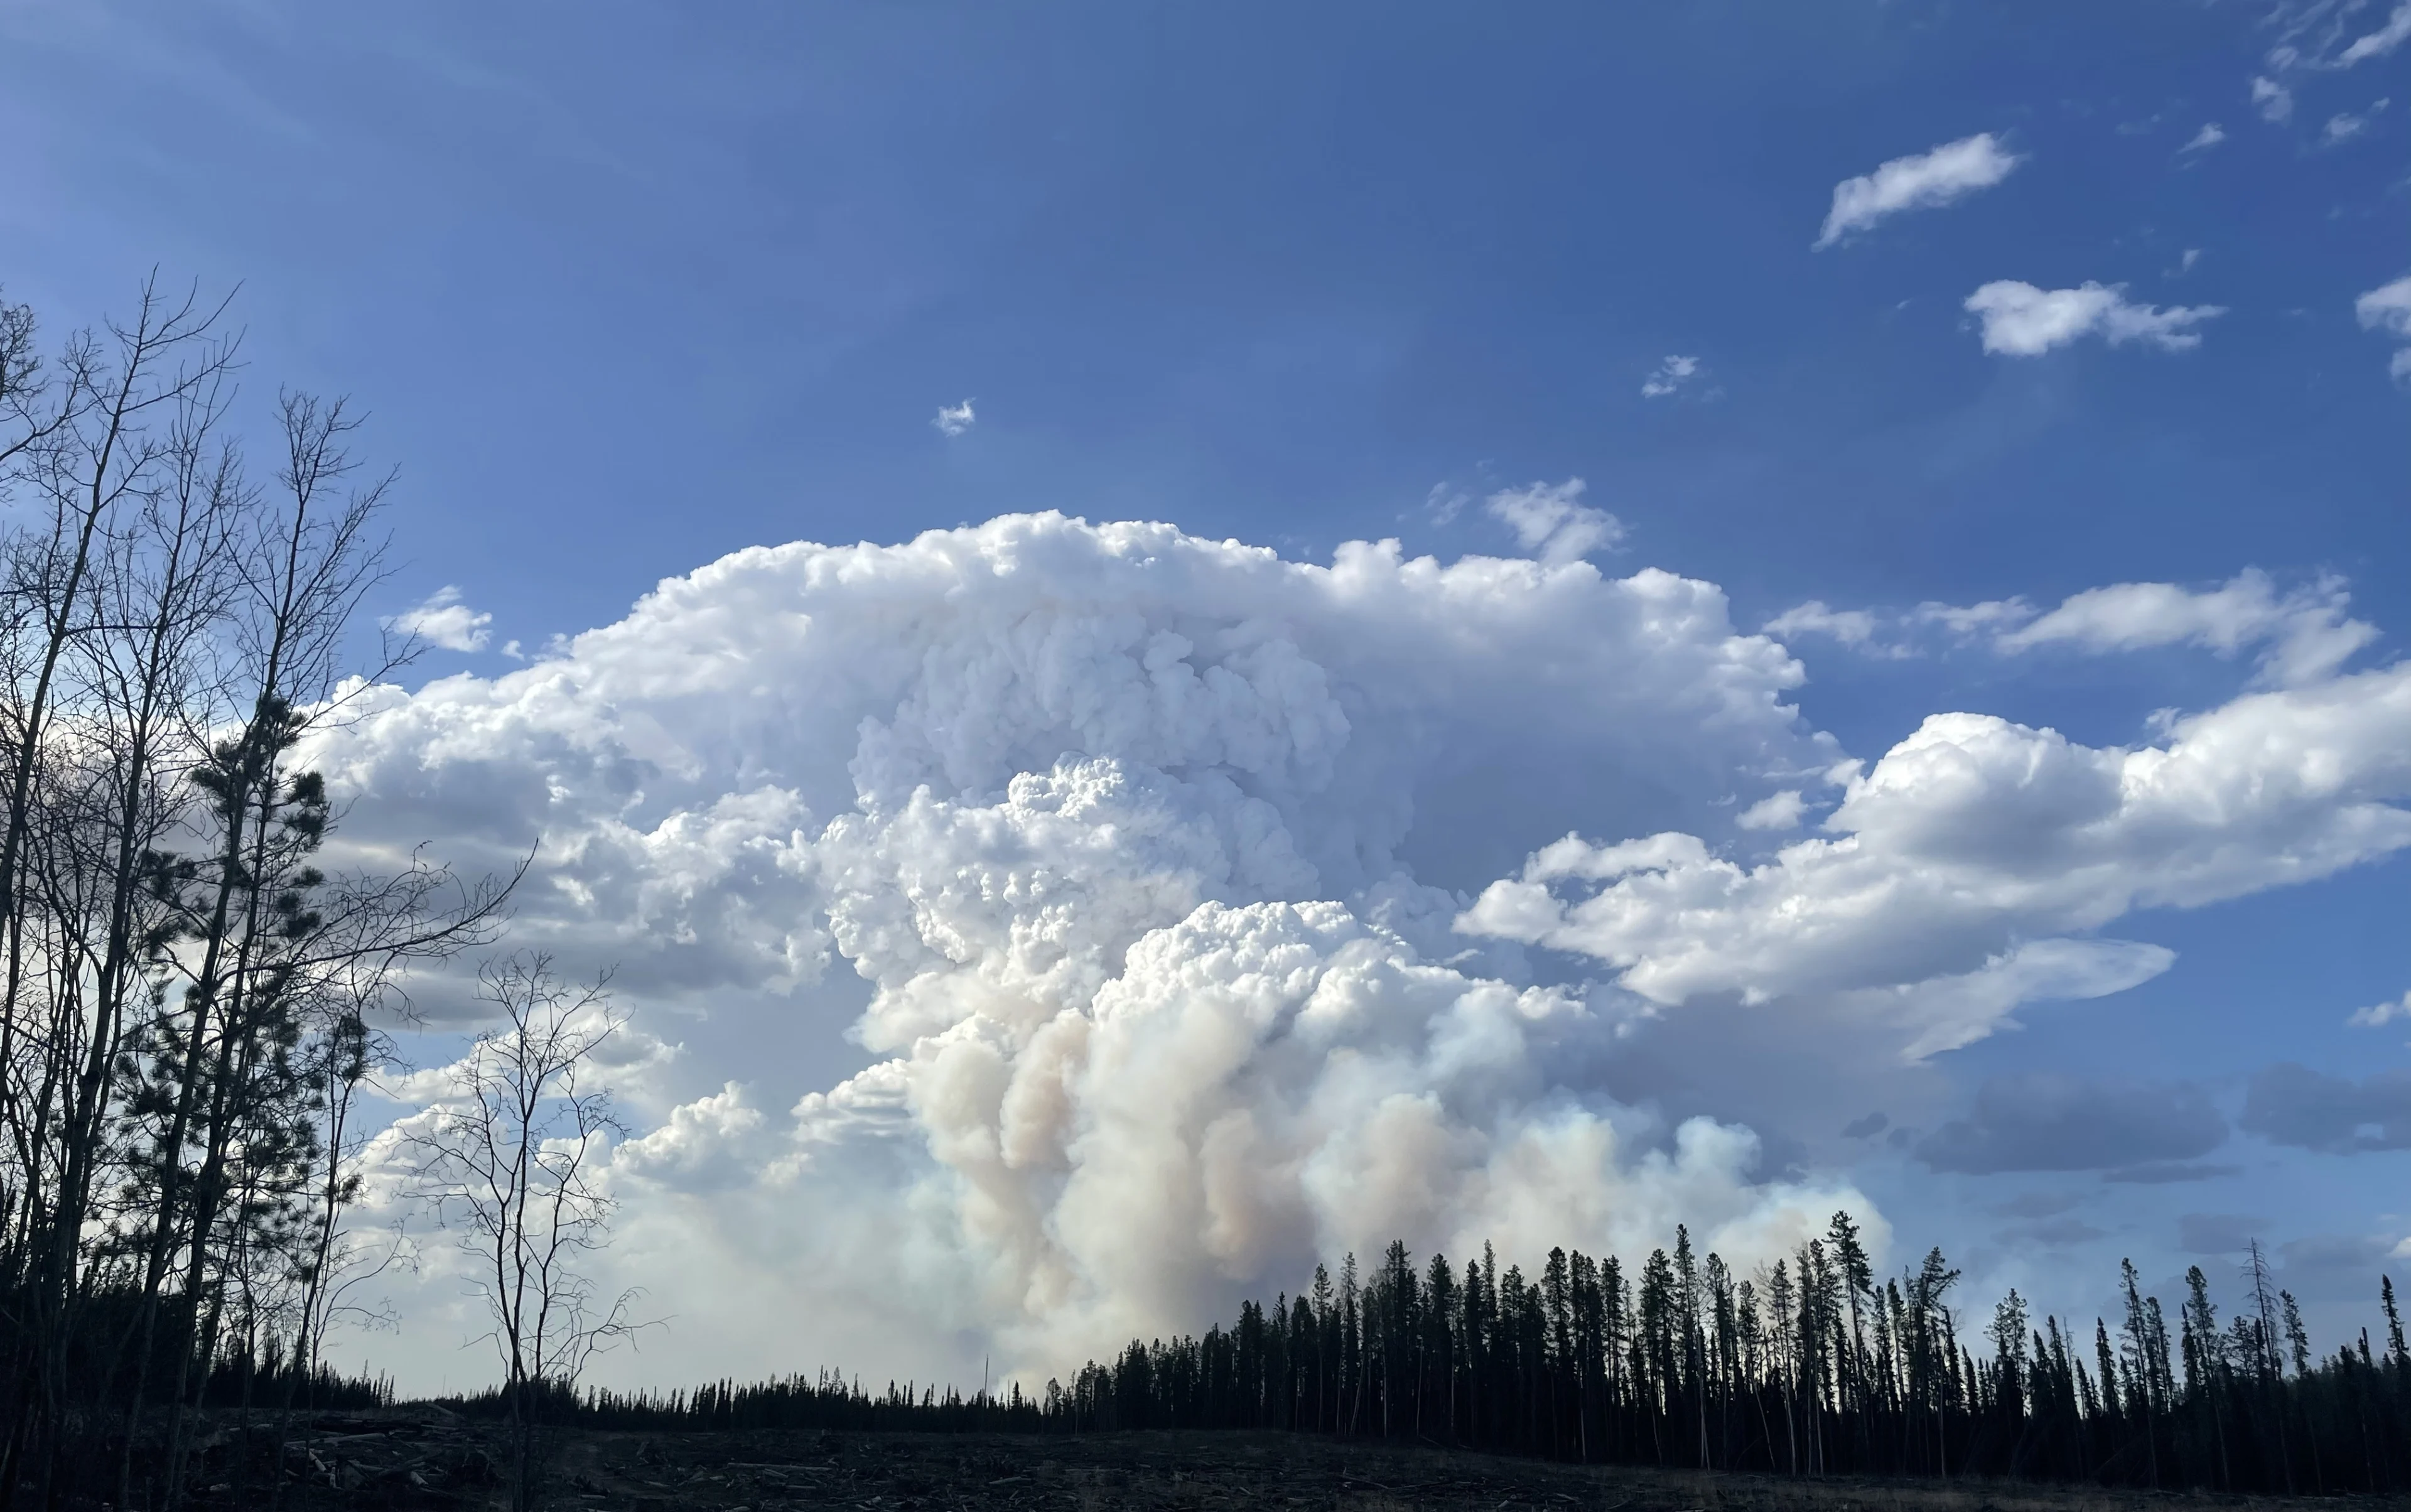  Out-of-control wildfires 'unprecedented crisis', says Alberta premier